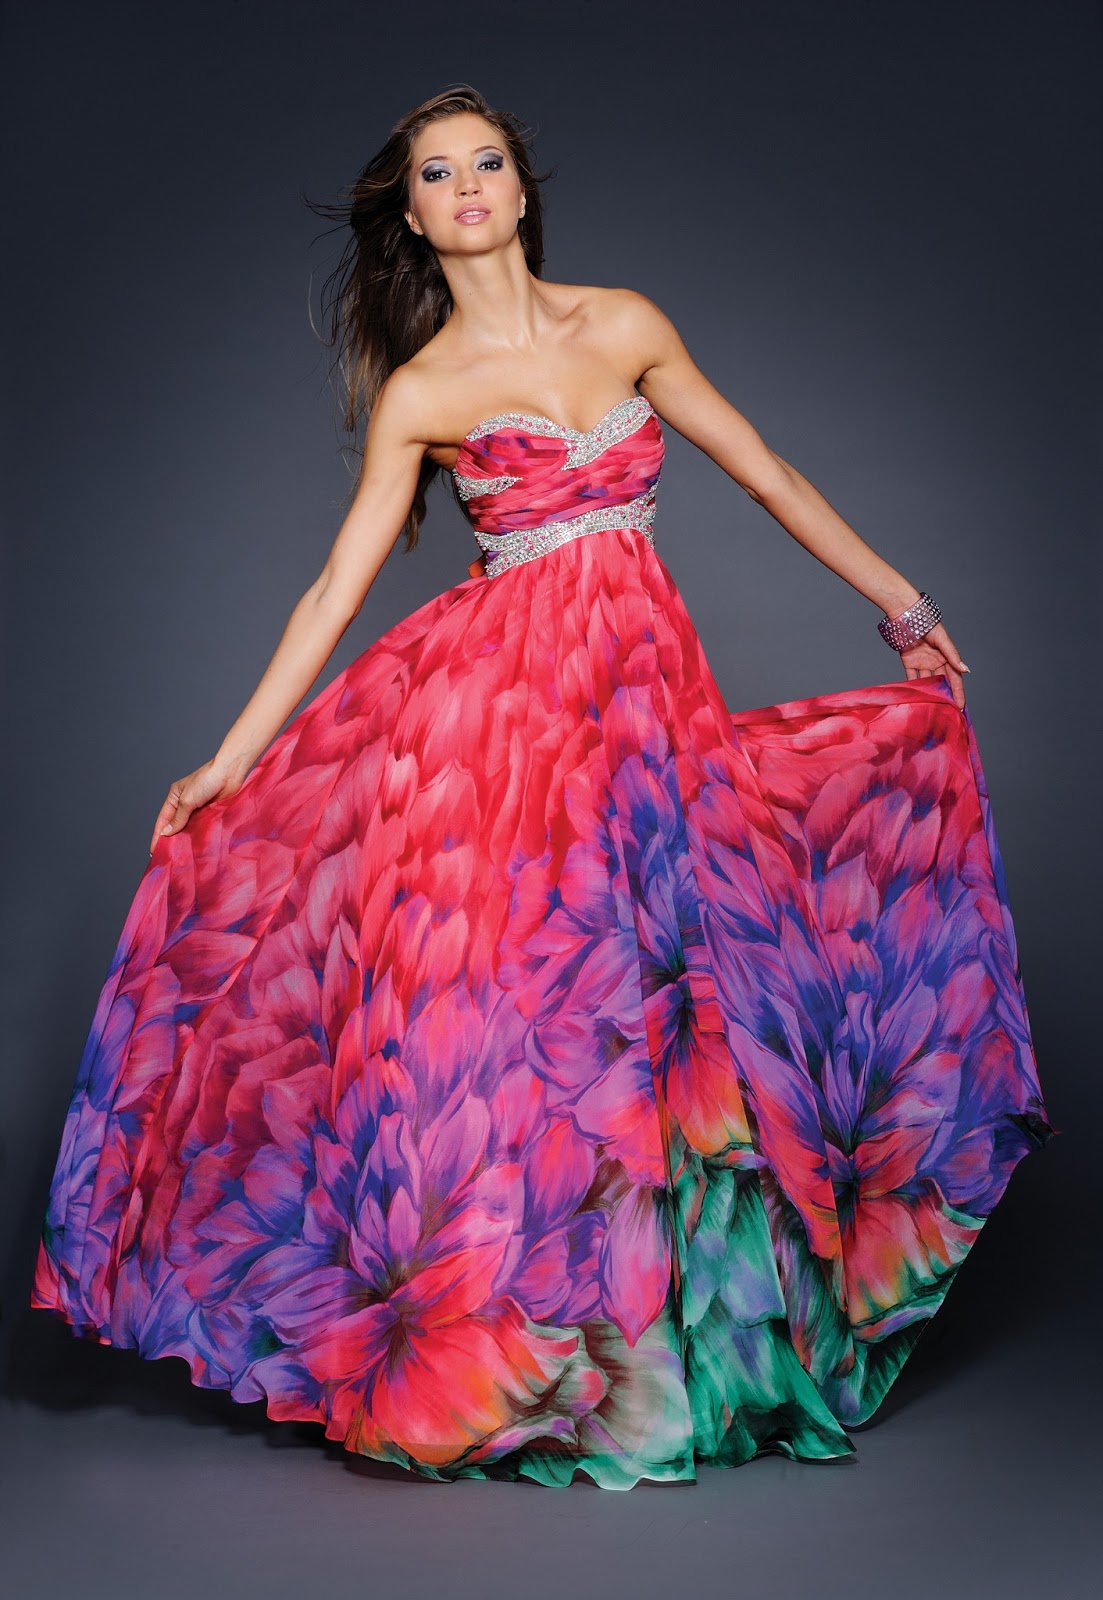 Blog of Wedding and Occasion Wear: Print Long Dresses for 2013 Summer ...